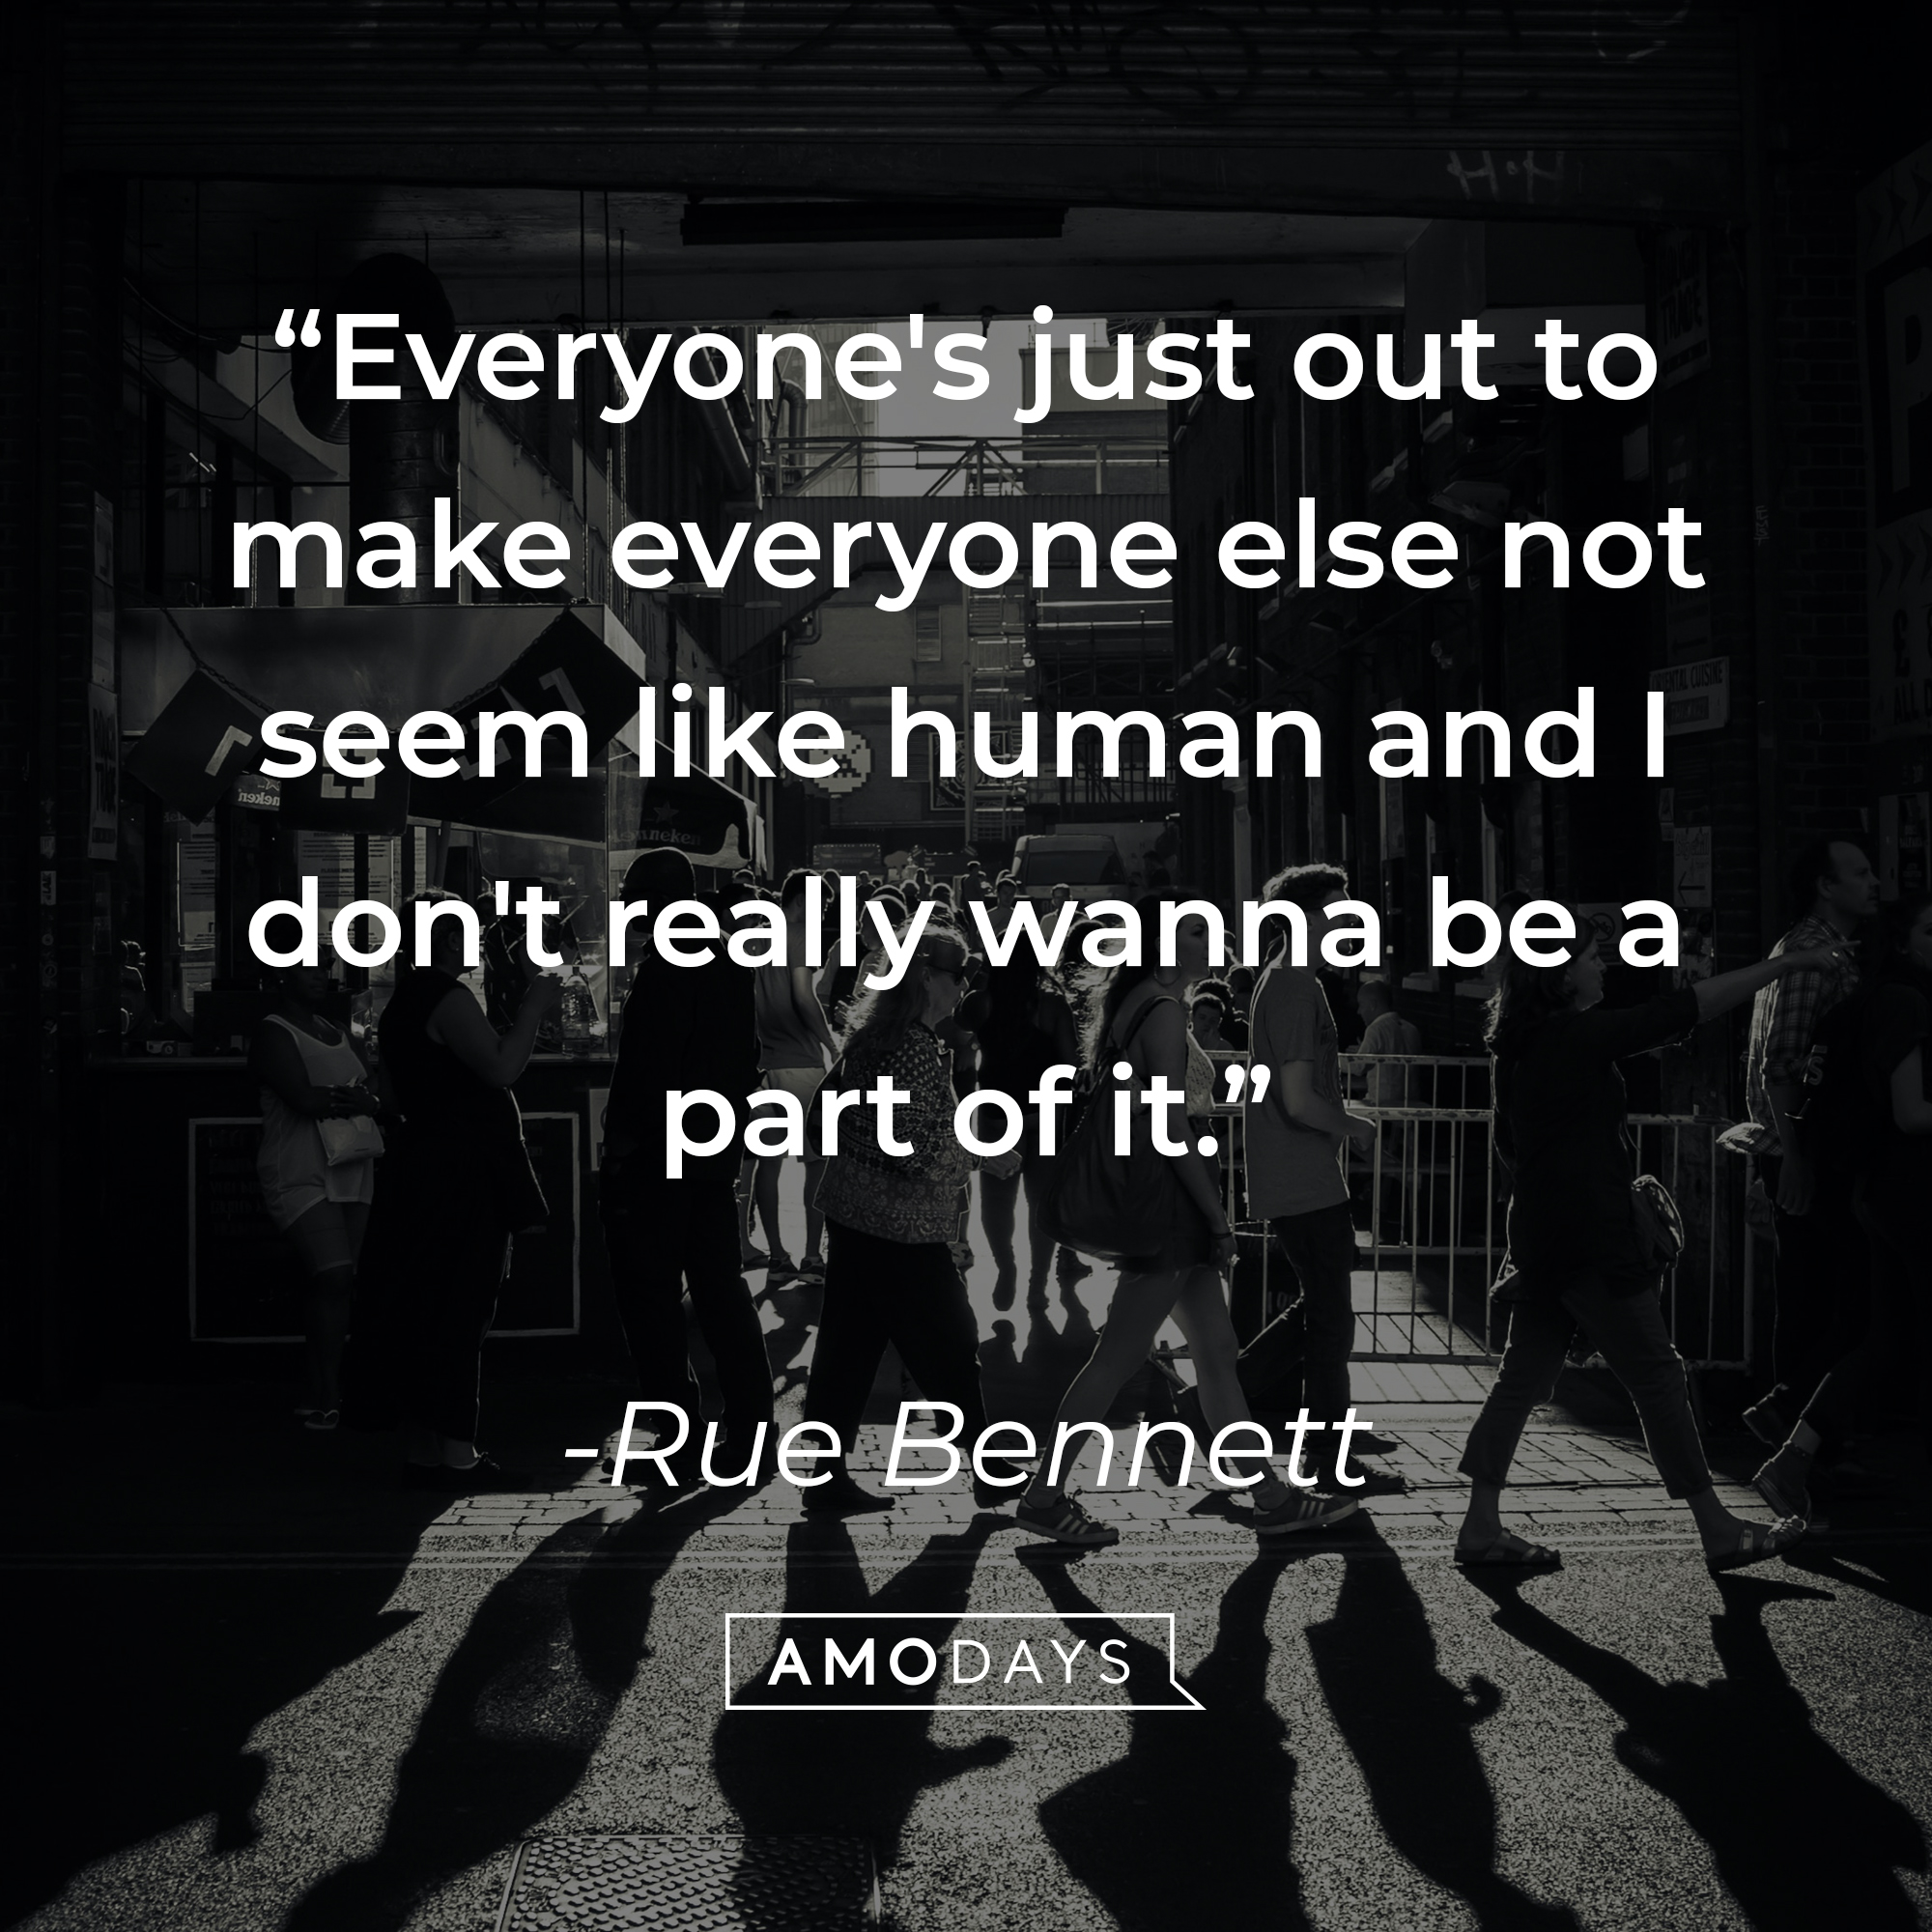 Rue Bennett's quote: "Everyone's just out to make everyone else not seem like human and I don't really wanna be a part of it." | Source: unsplash.com